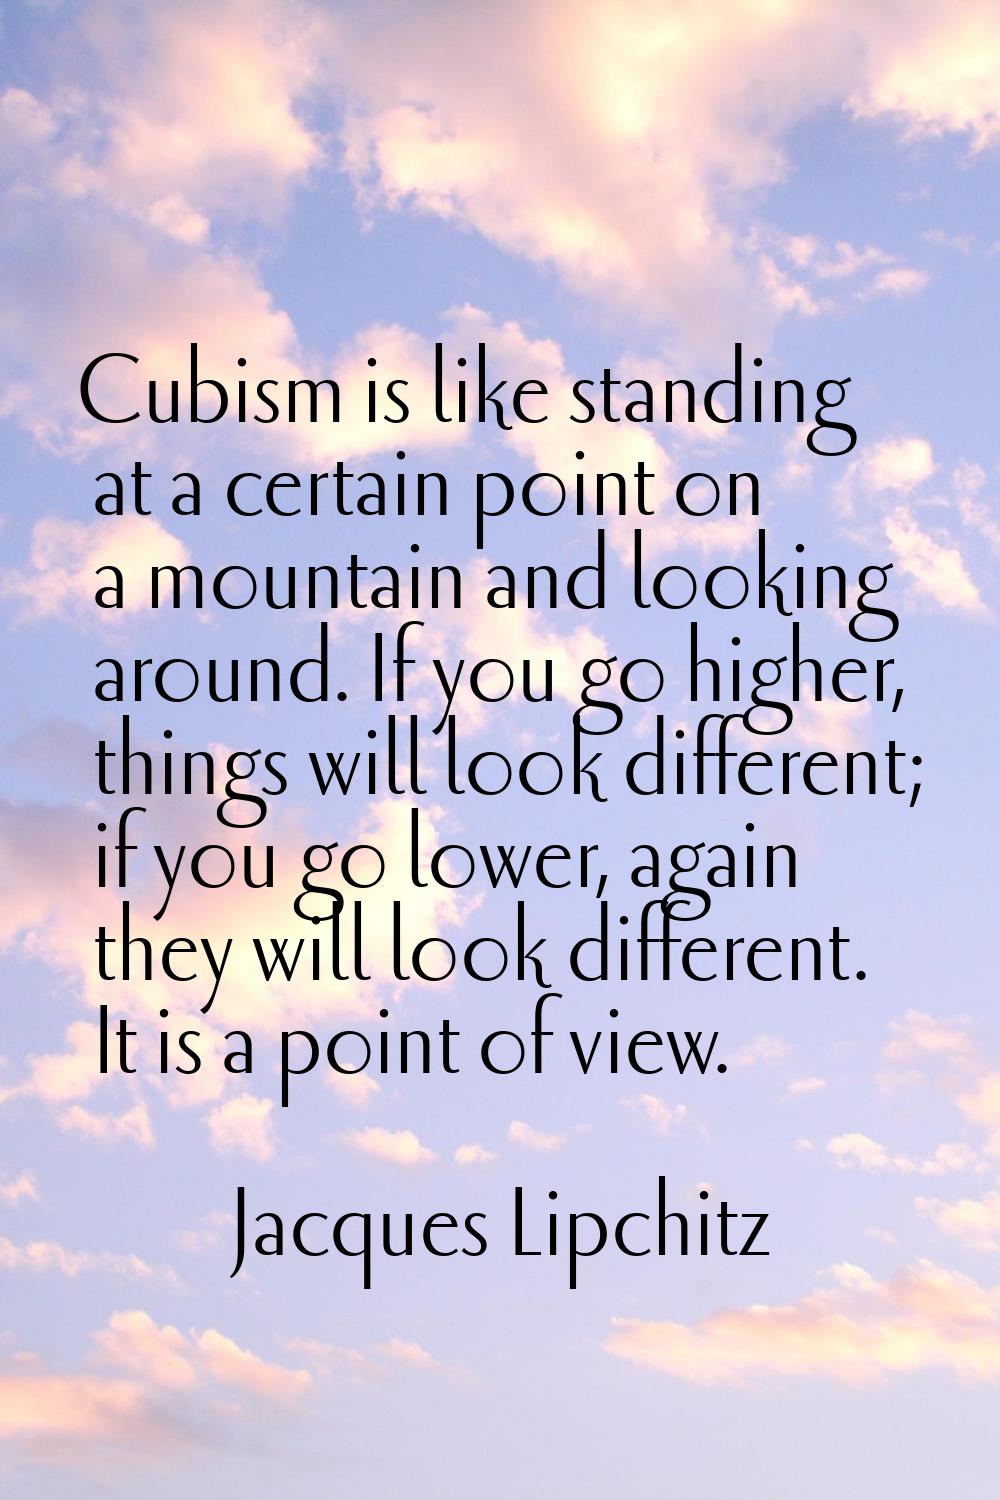 Cubism is like standing at a certain point on a mountain and looking around. If you go higher, thin